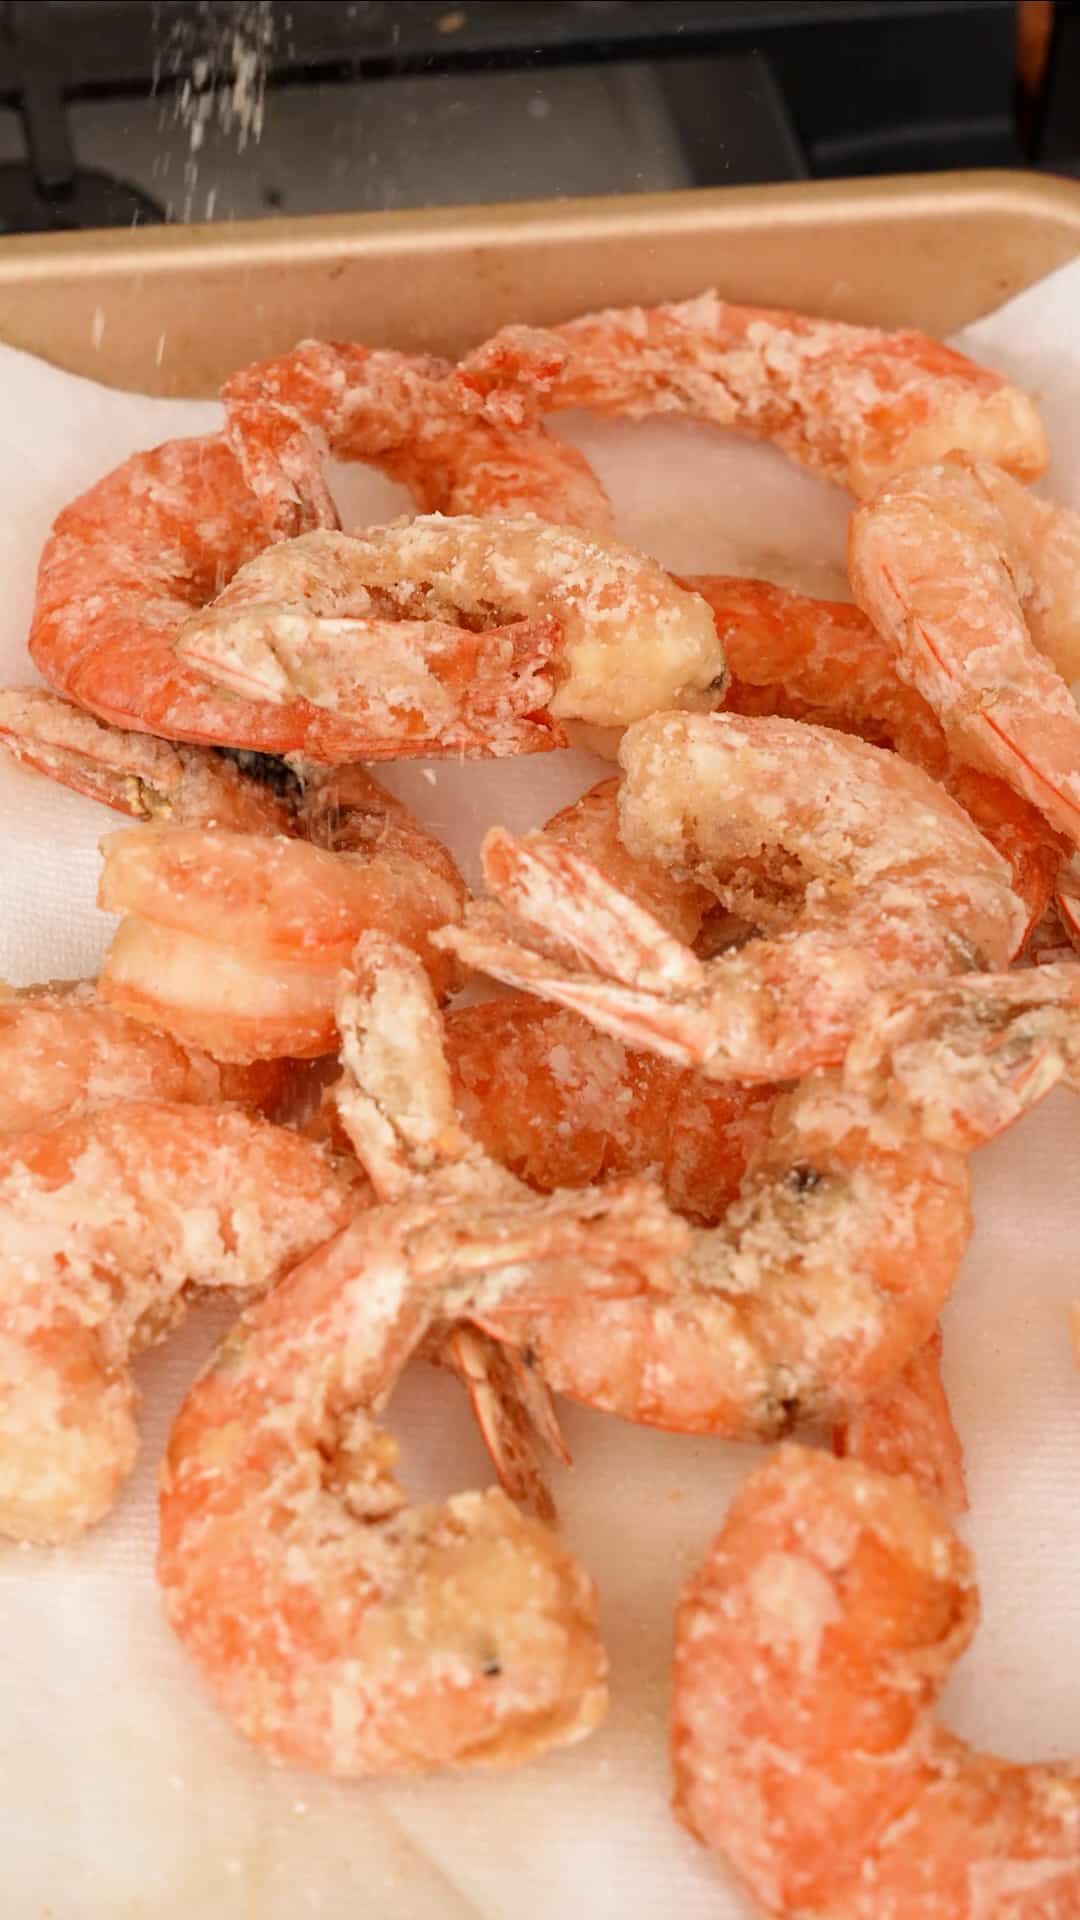 Fried shrimp on a tray being coated with spicy salt.